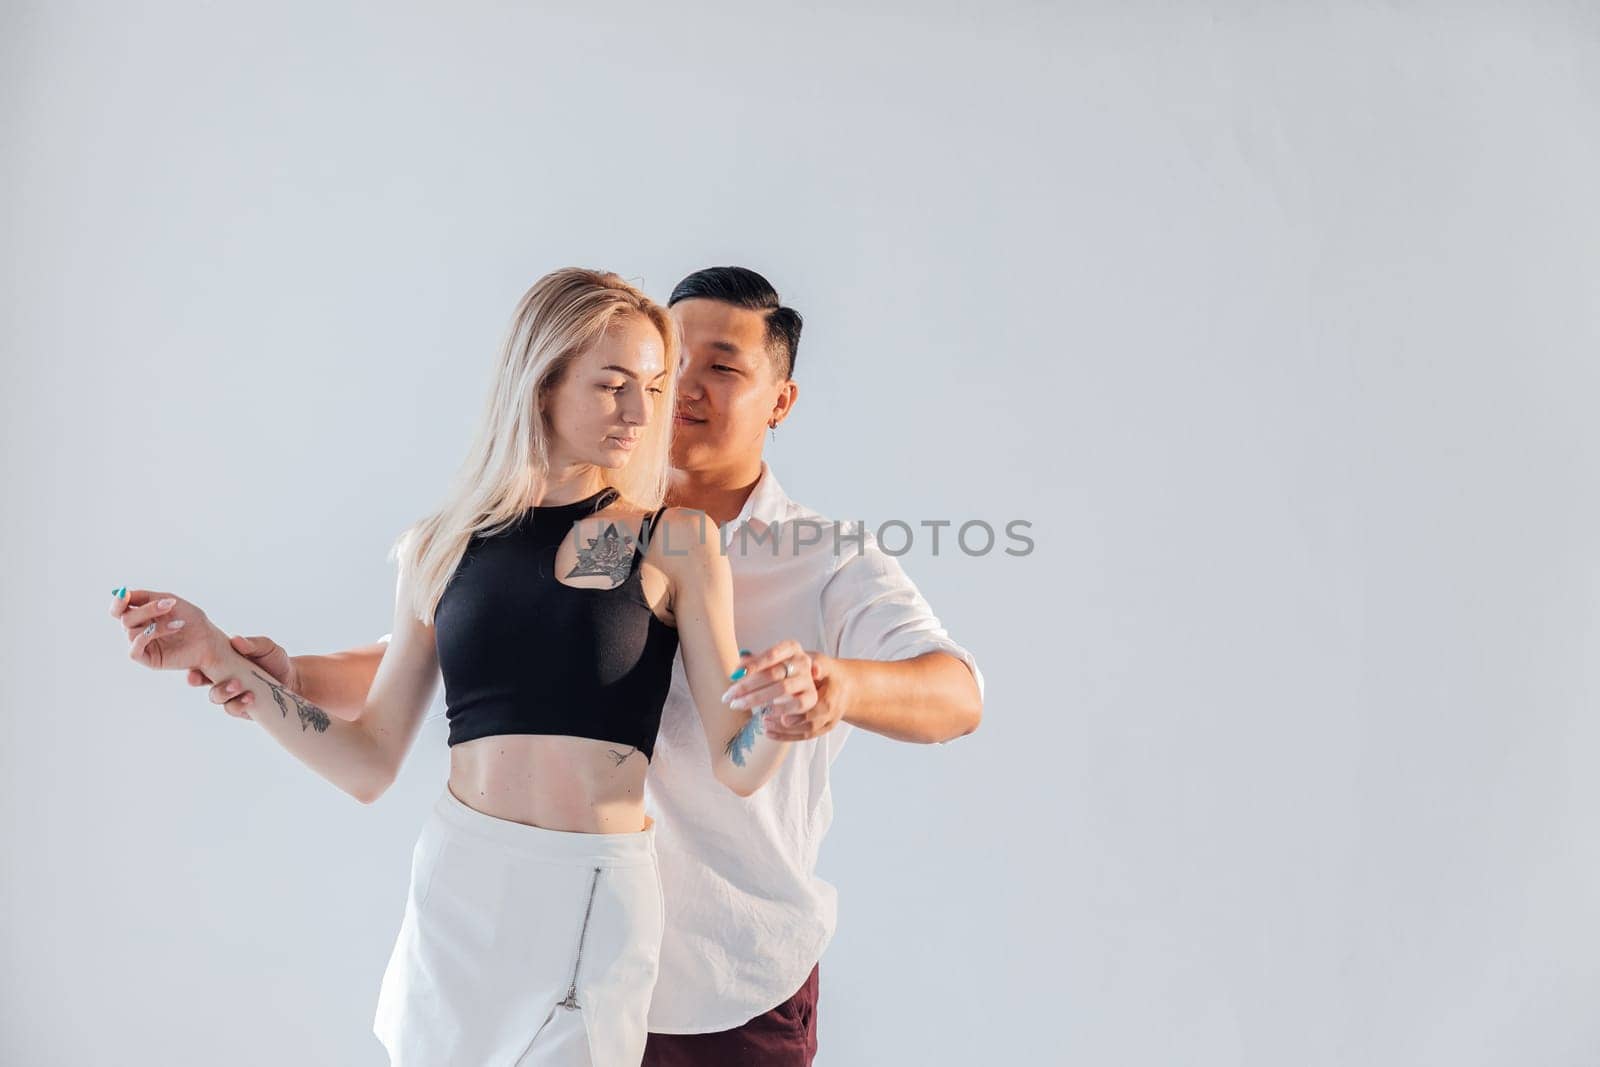 Man and woman dancers perform a dance on a white background